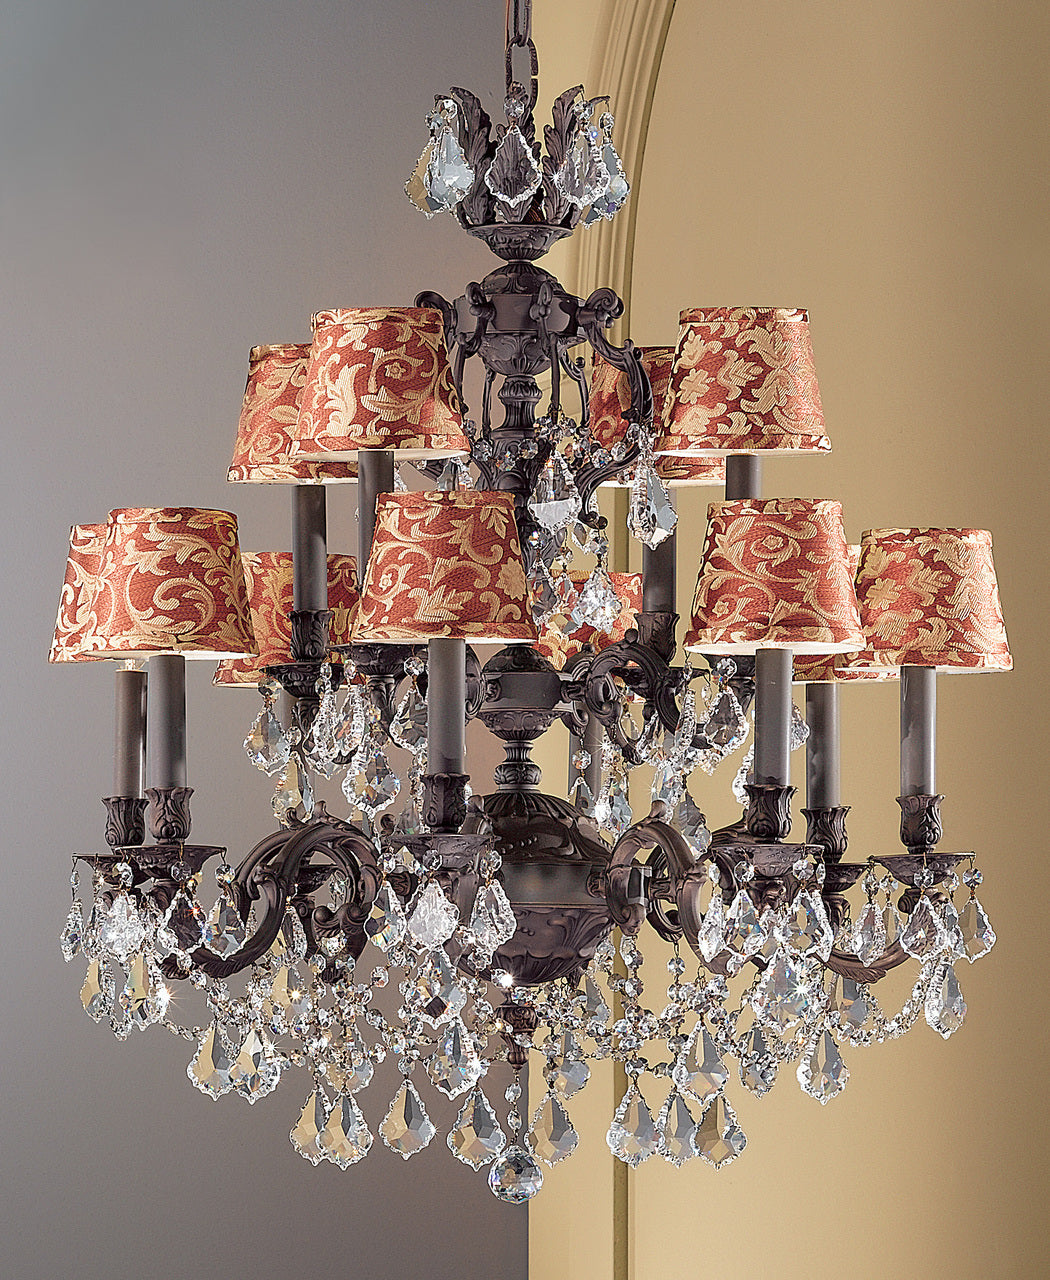 Classic Lighting 57389 AGB CGT Chateau Imperial Crystal Chandelier in Aged Bronze (Imported from Spain)